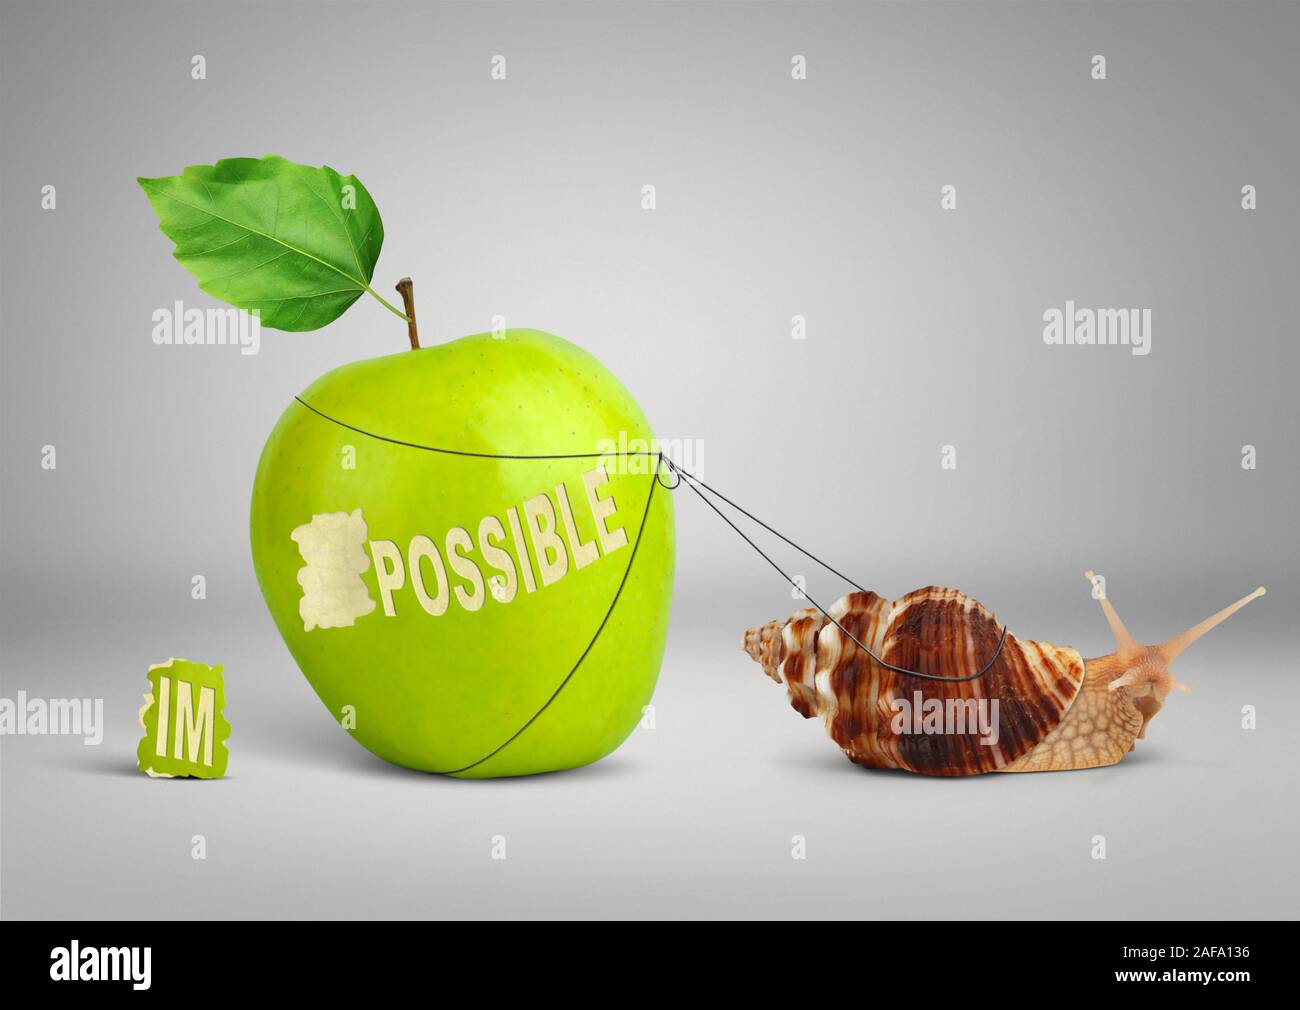 Impossible is possible concept, Snail pulling big apple Stock Photo